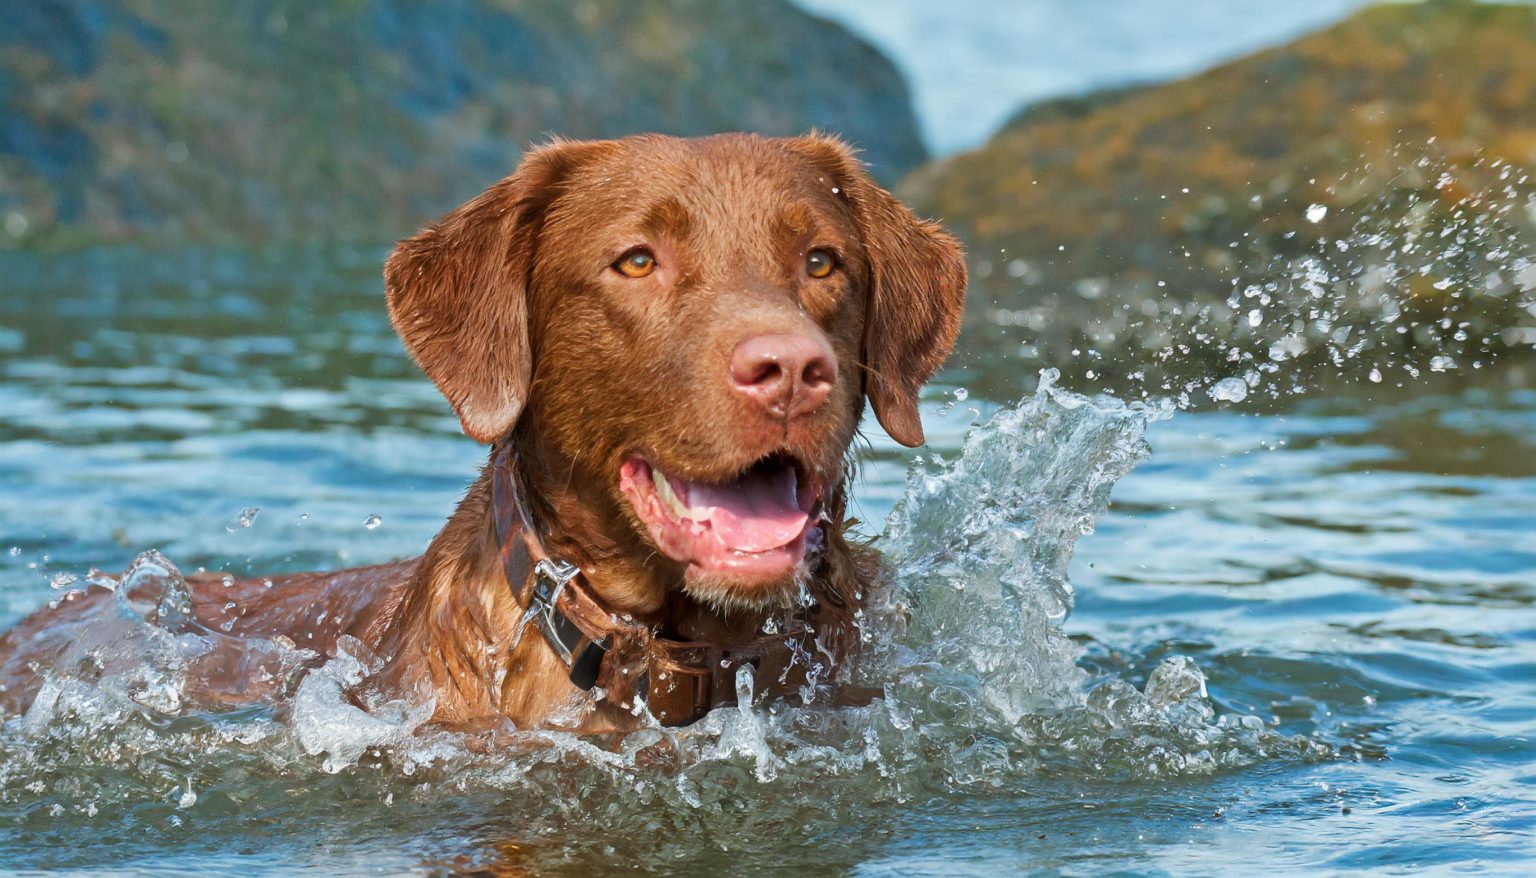 Chesapeake Bay Retrievers trace their history to two pups who were rescued from a foundering ship in Maryland in 1807. The male "Sailor" and female "Canton" were described as Newfoundland dogs, but were more accurately Lesser Newfoundland or St. John's water dogs.